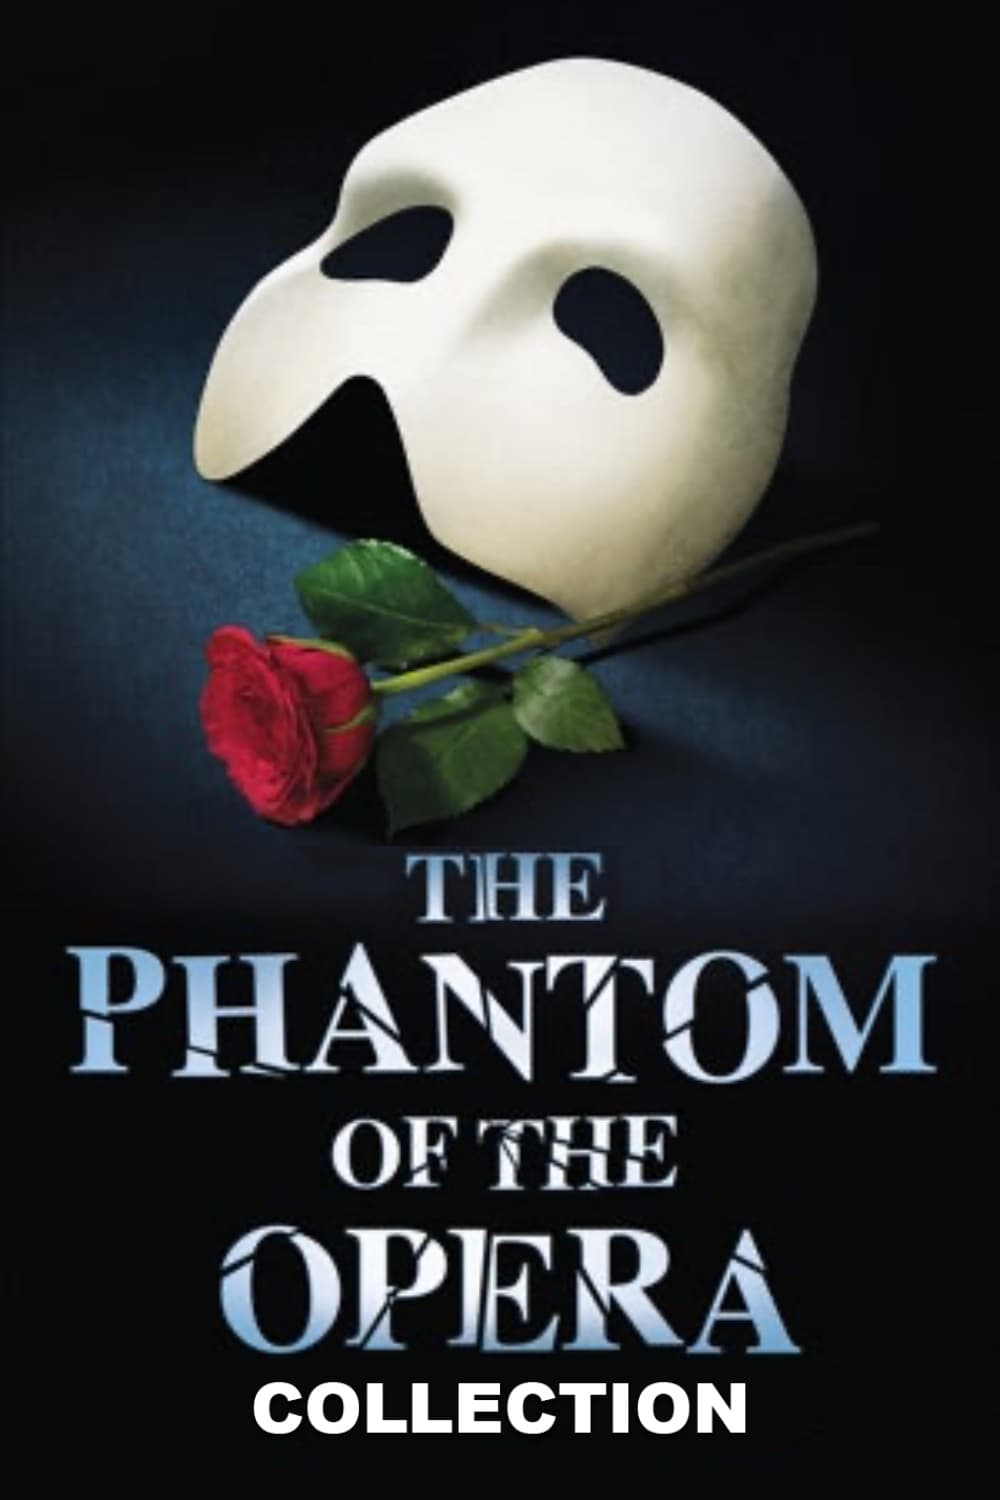 The Phantom of the Opera Collection | The Poster Database (TPDb)